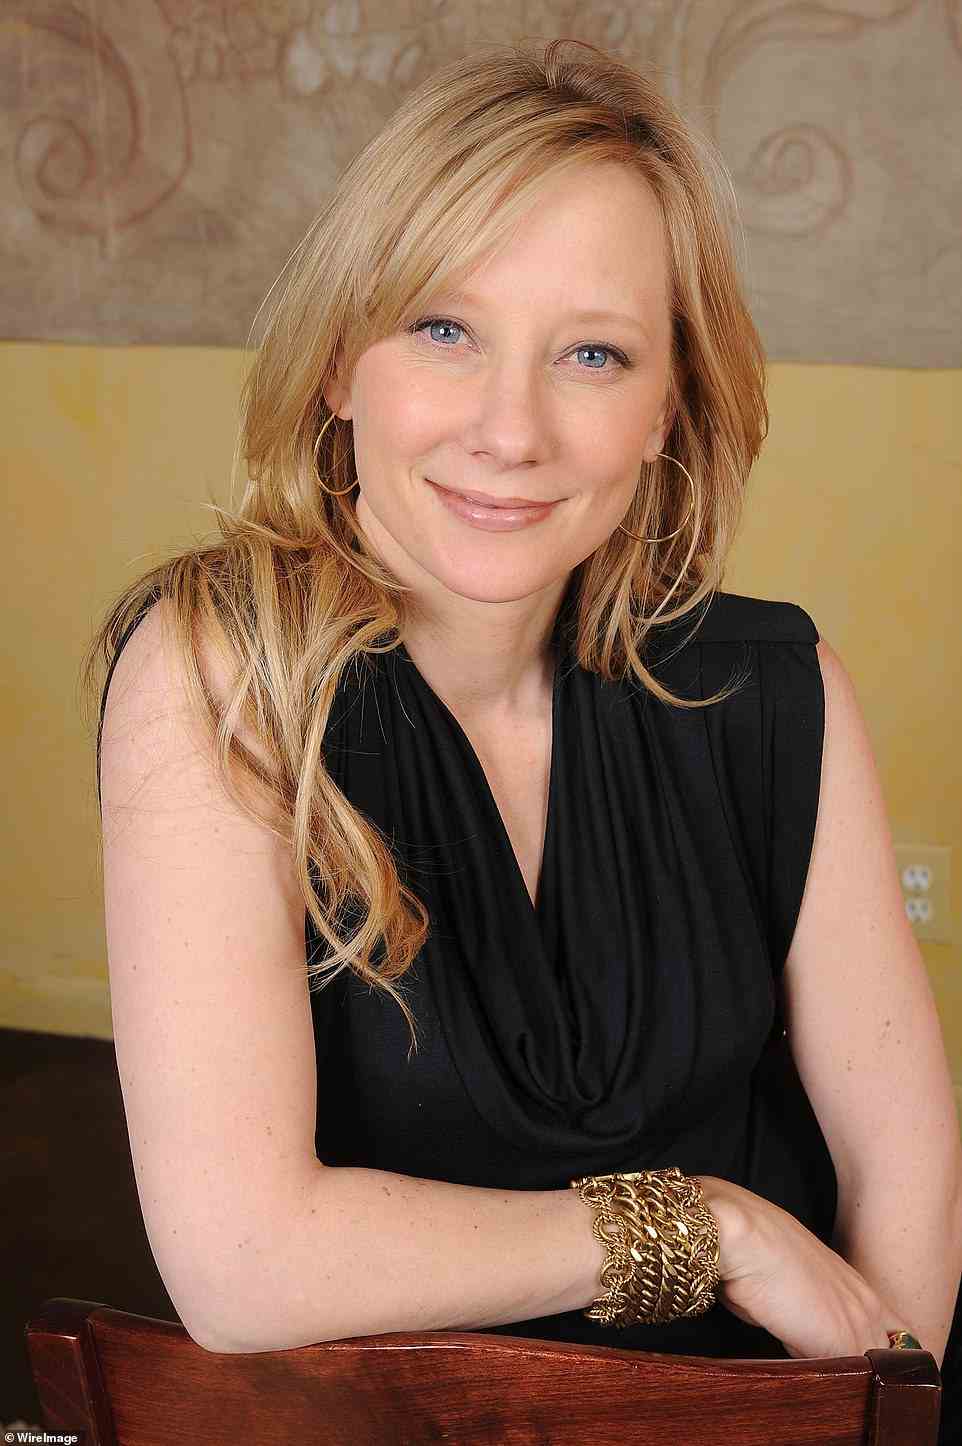 Heche said she was 'insane' for 31 years, telling ABC that 'I was raised in a crazy family and it took 31 years to get the crazy out of me'